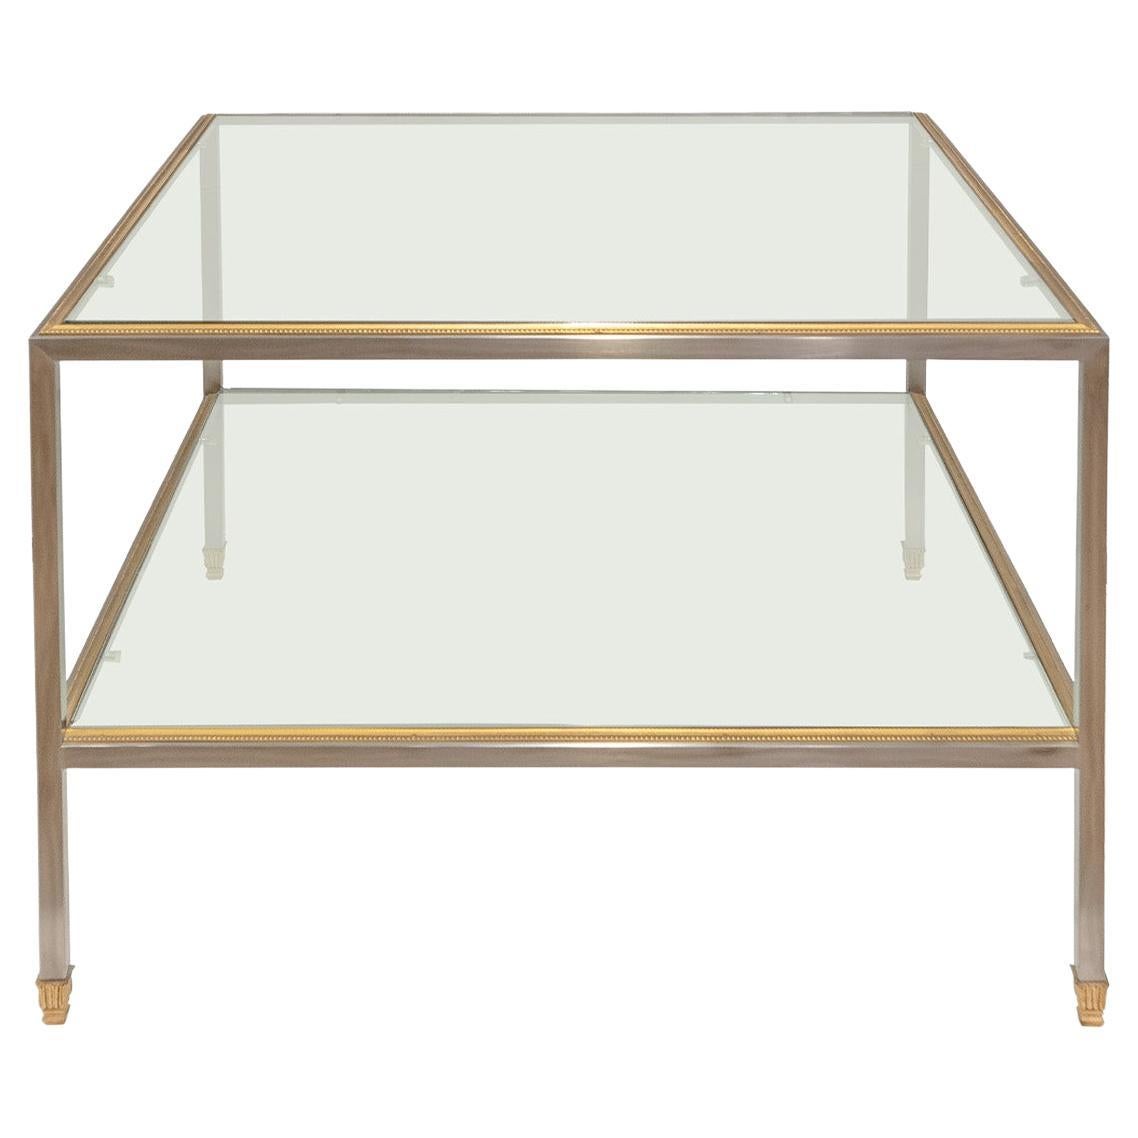 P.E. Guerin Exquisitely Crafted "Steel and Burnished Brass Dore Table" 1982